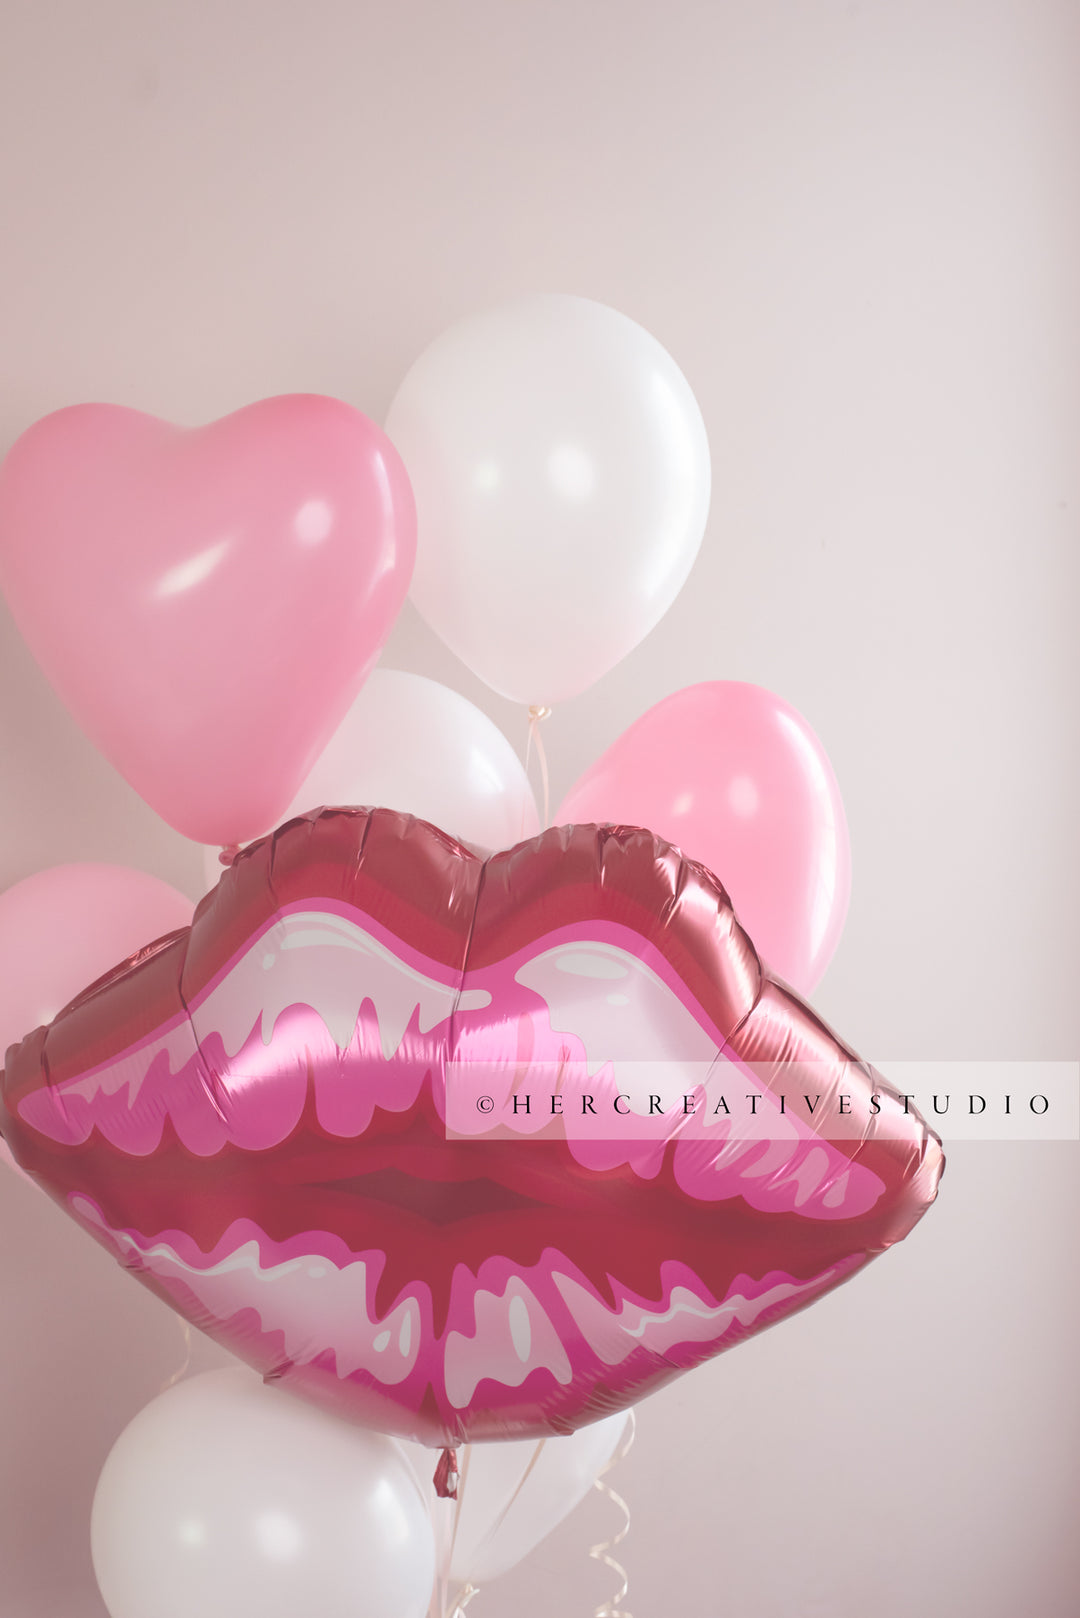 Lips, Pink and White Balloons, Styled Stock Image